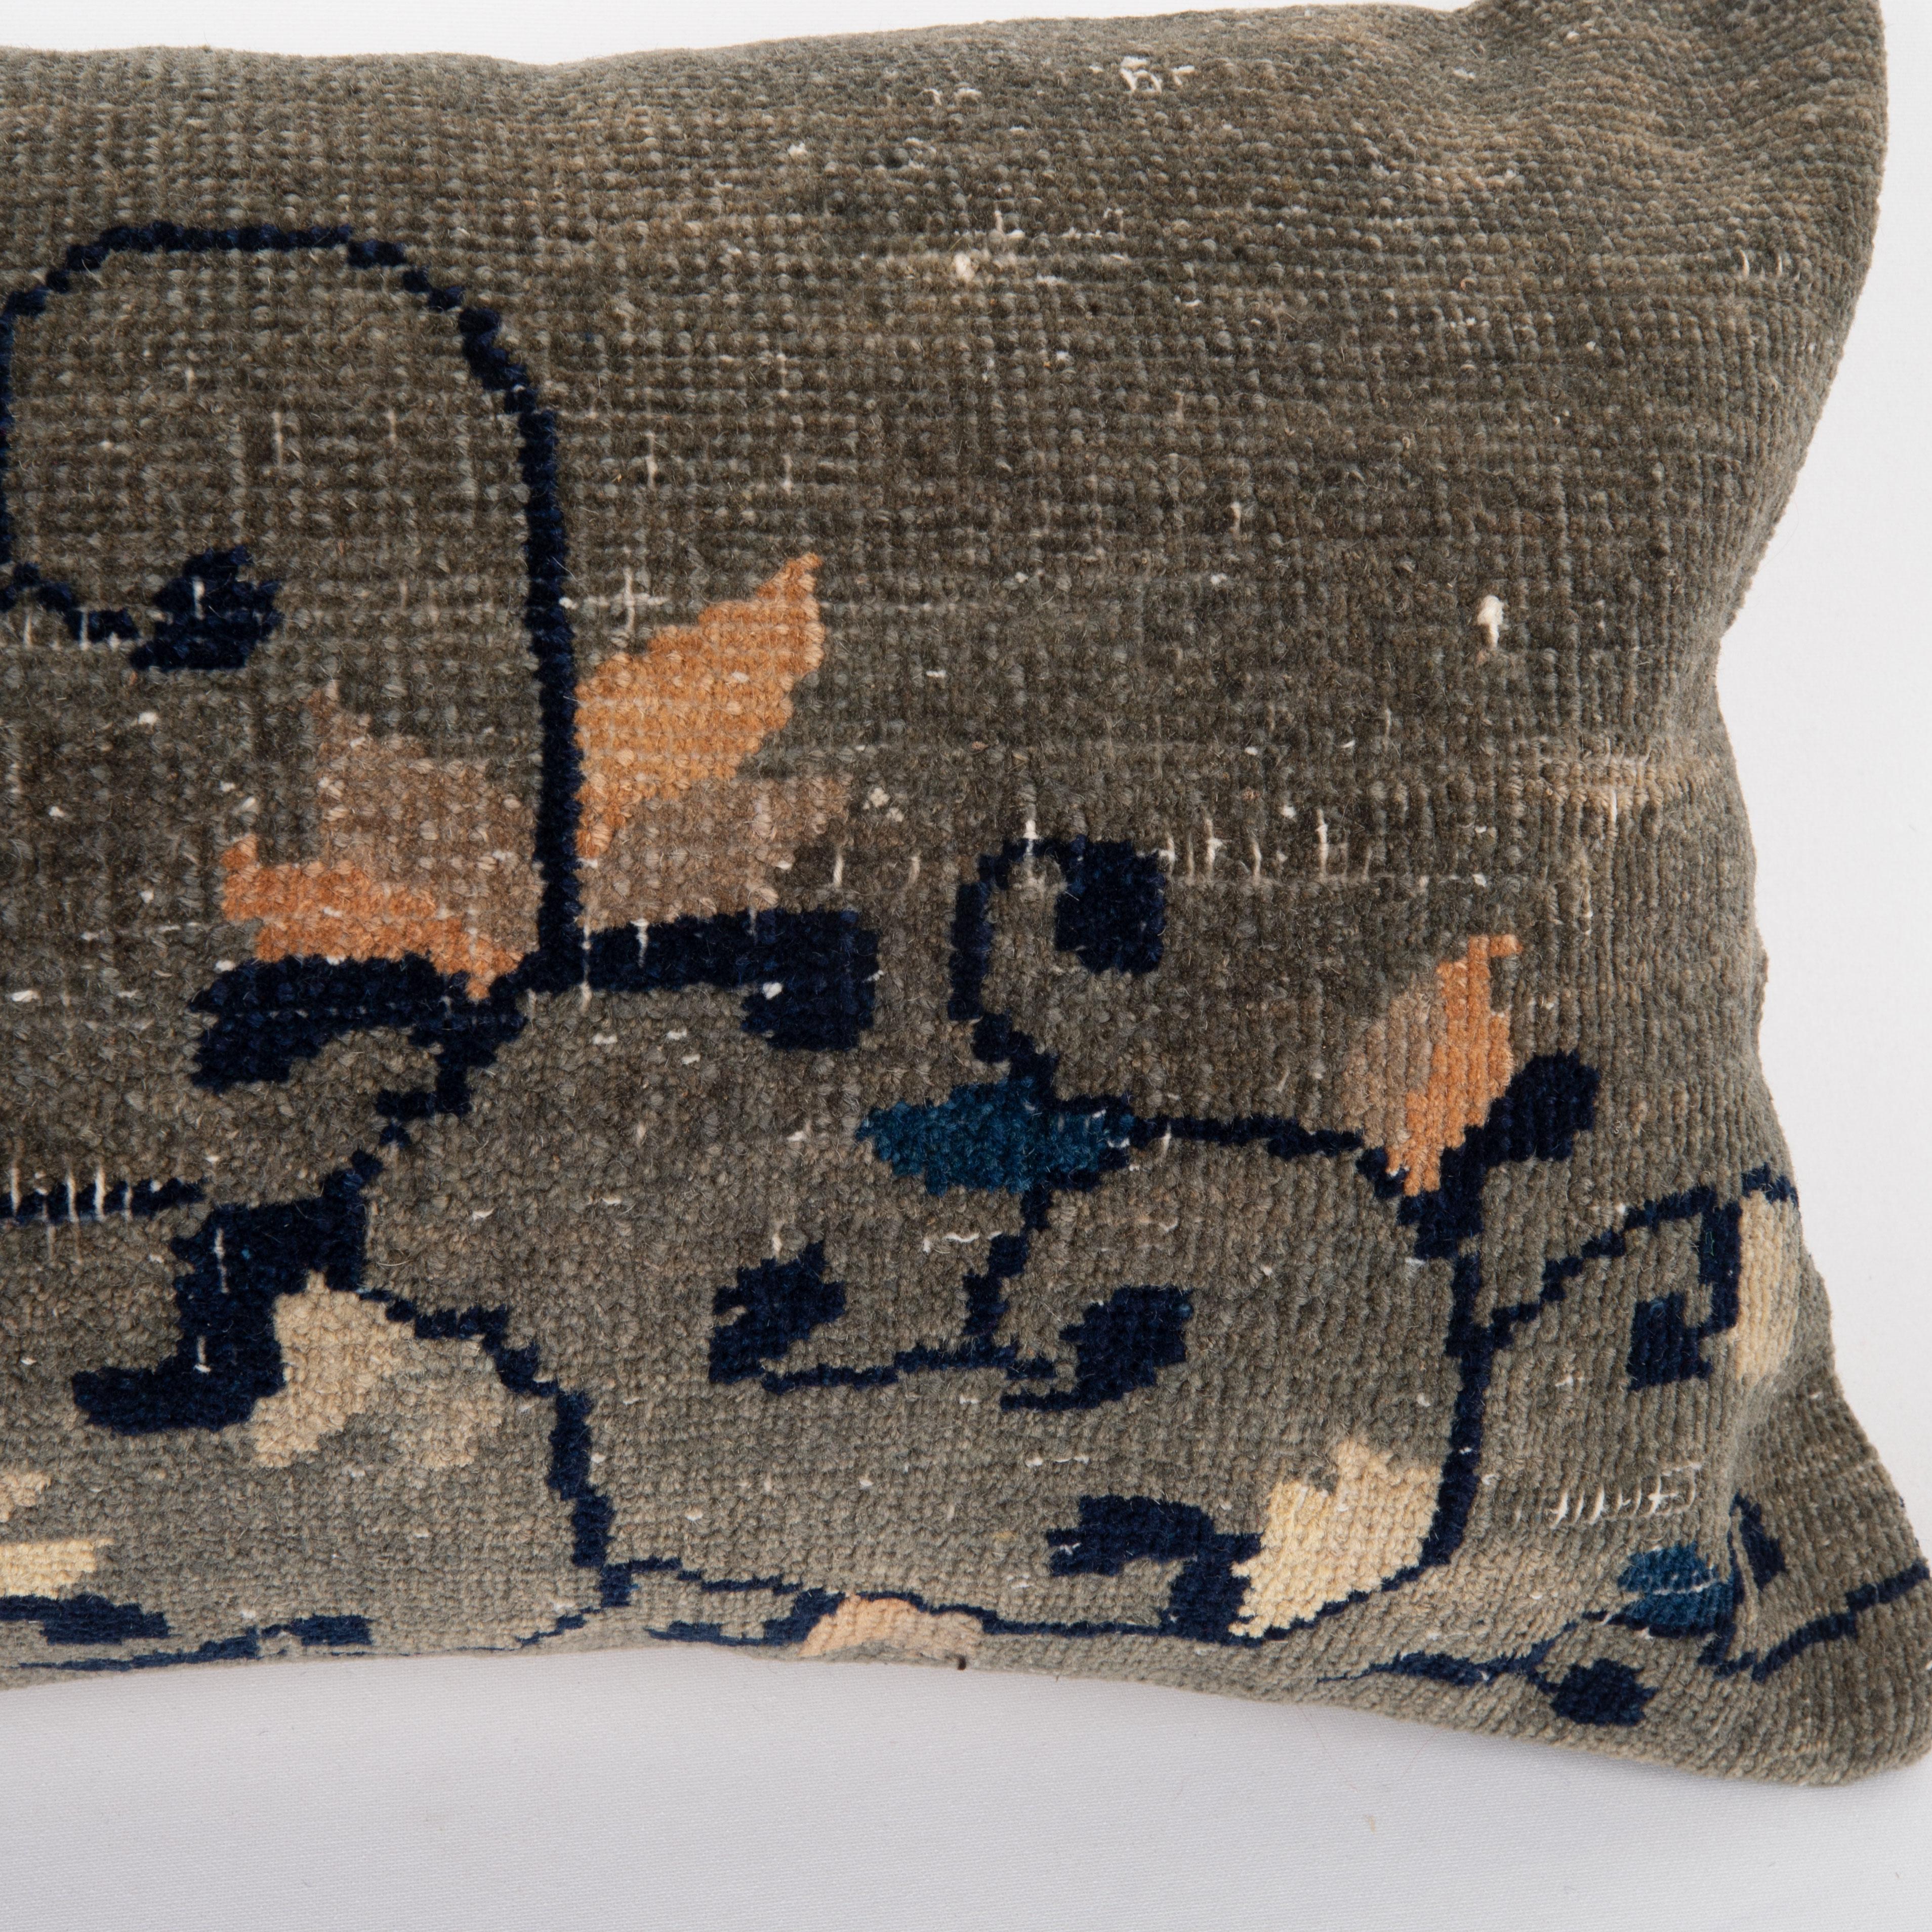 20th Century Pillow Cover Made from a Chinese Art Deco Rug, early 20th C.